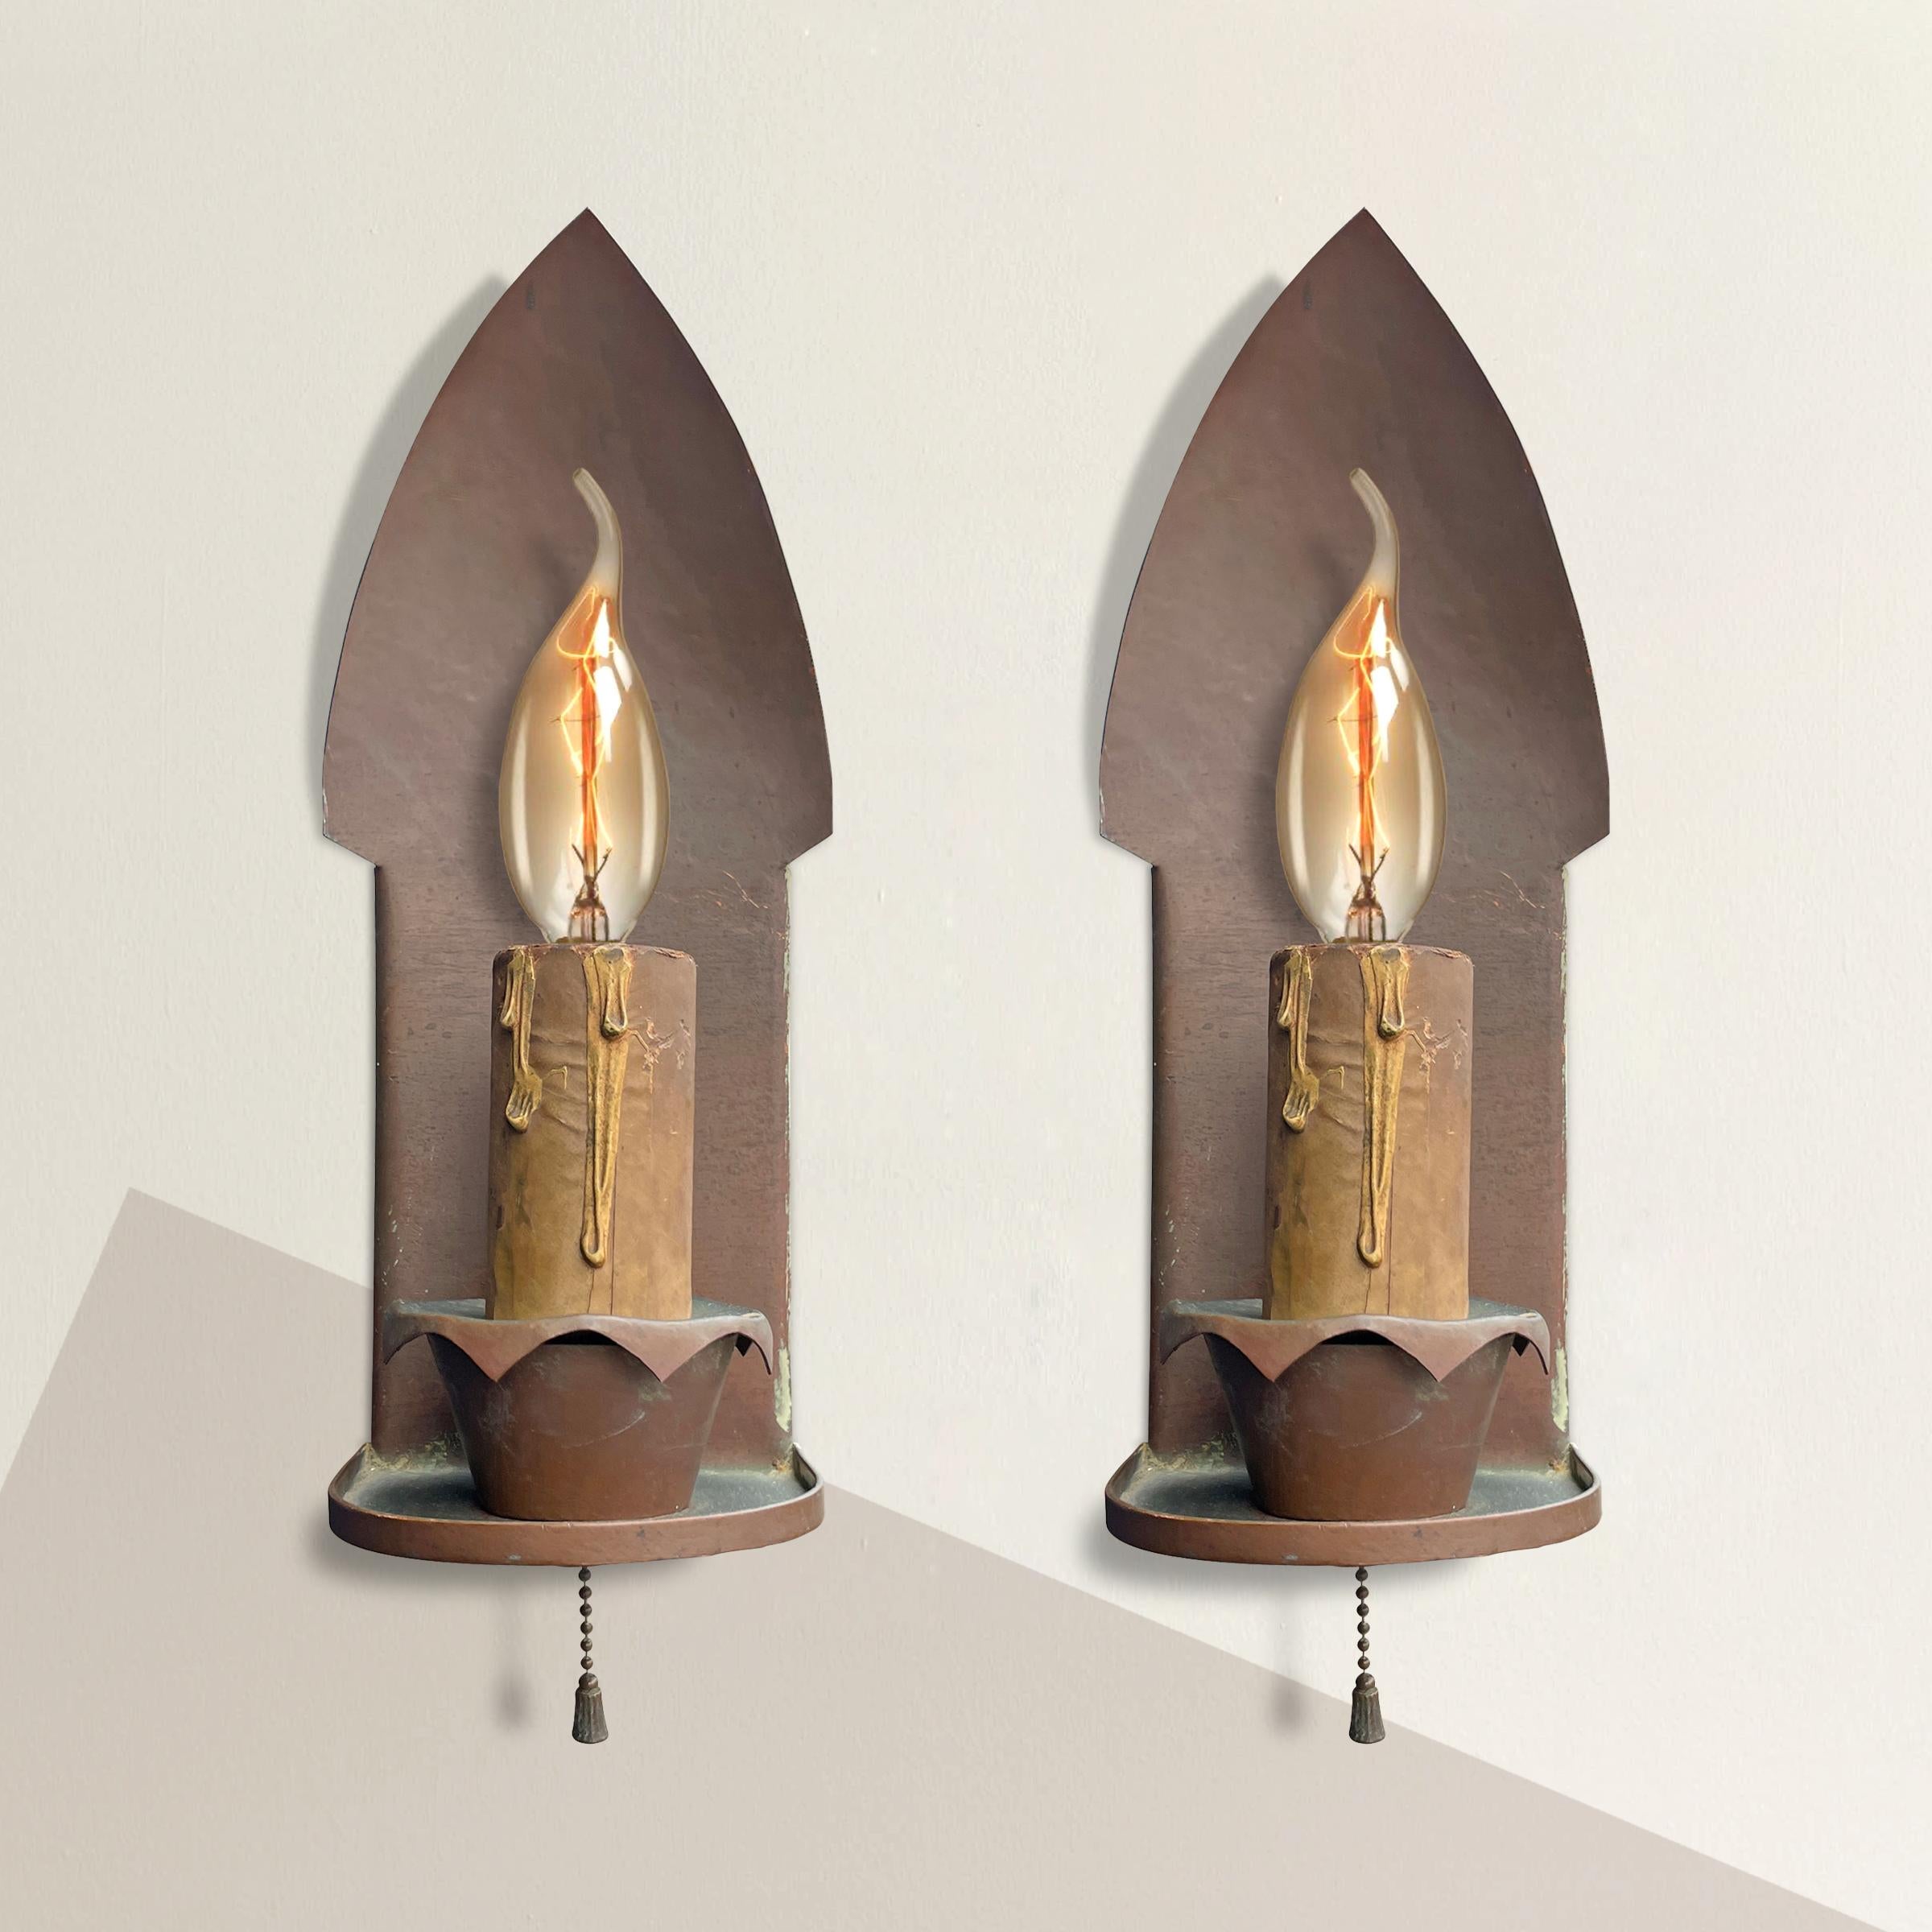 A charming pair of English Arts & Crafts hammered copper sconces, each with protruding arched backplates, faux candles, scalloped candle cups, and pulls chains.